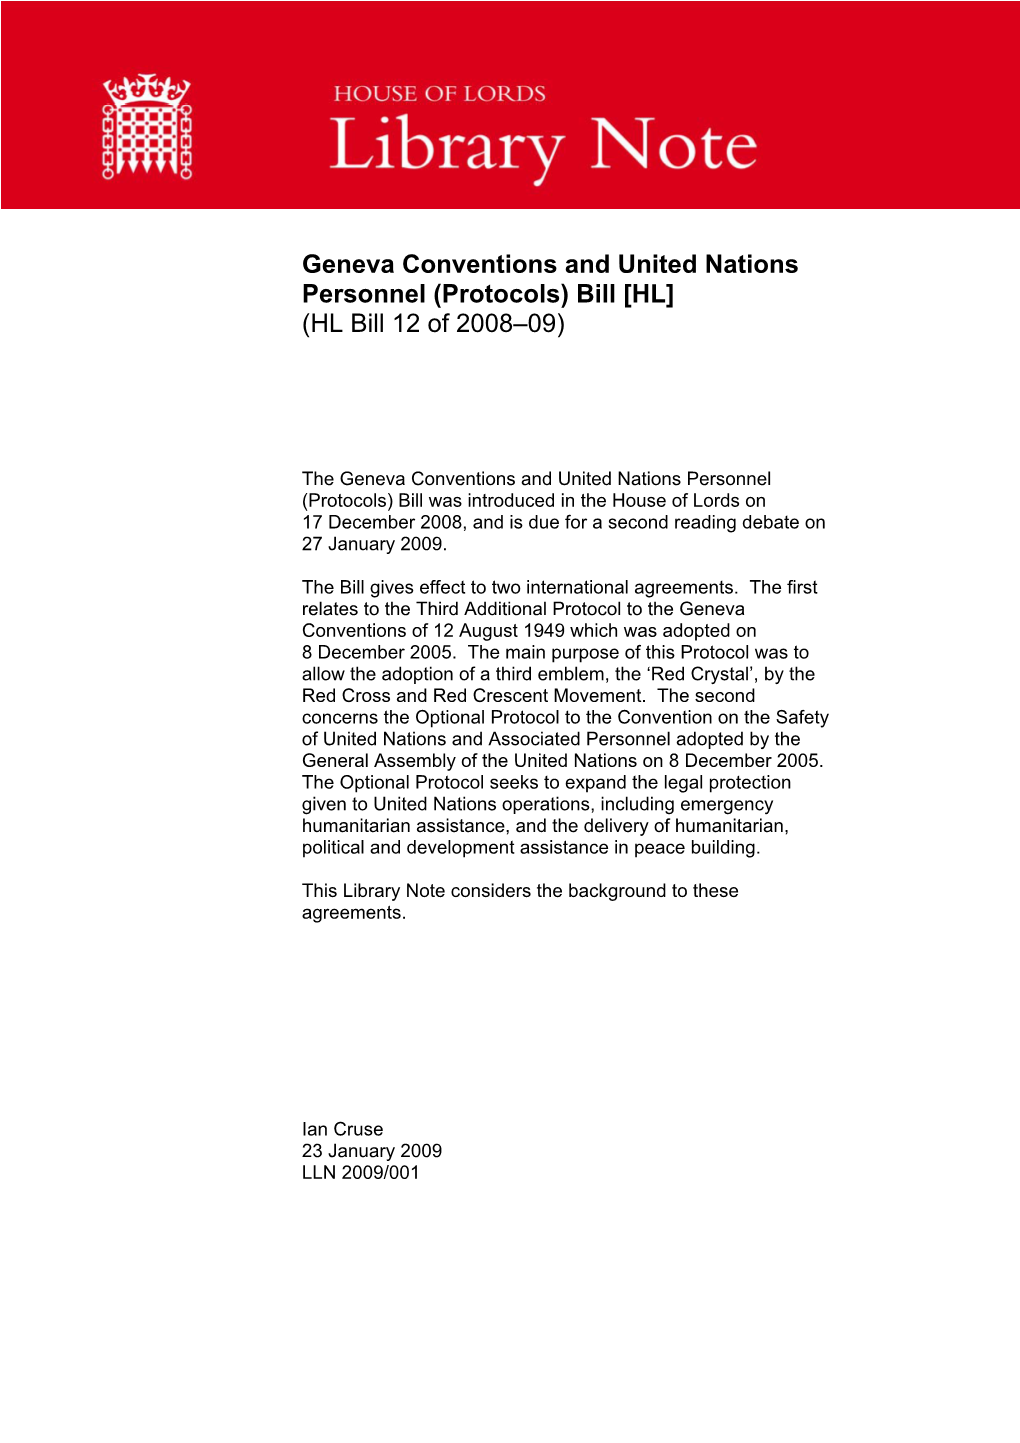 Geneva Conventions and United Nations Personnel (Protocols) Bill [HL] (HL Bill 12 of 2008–09)